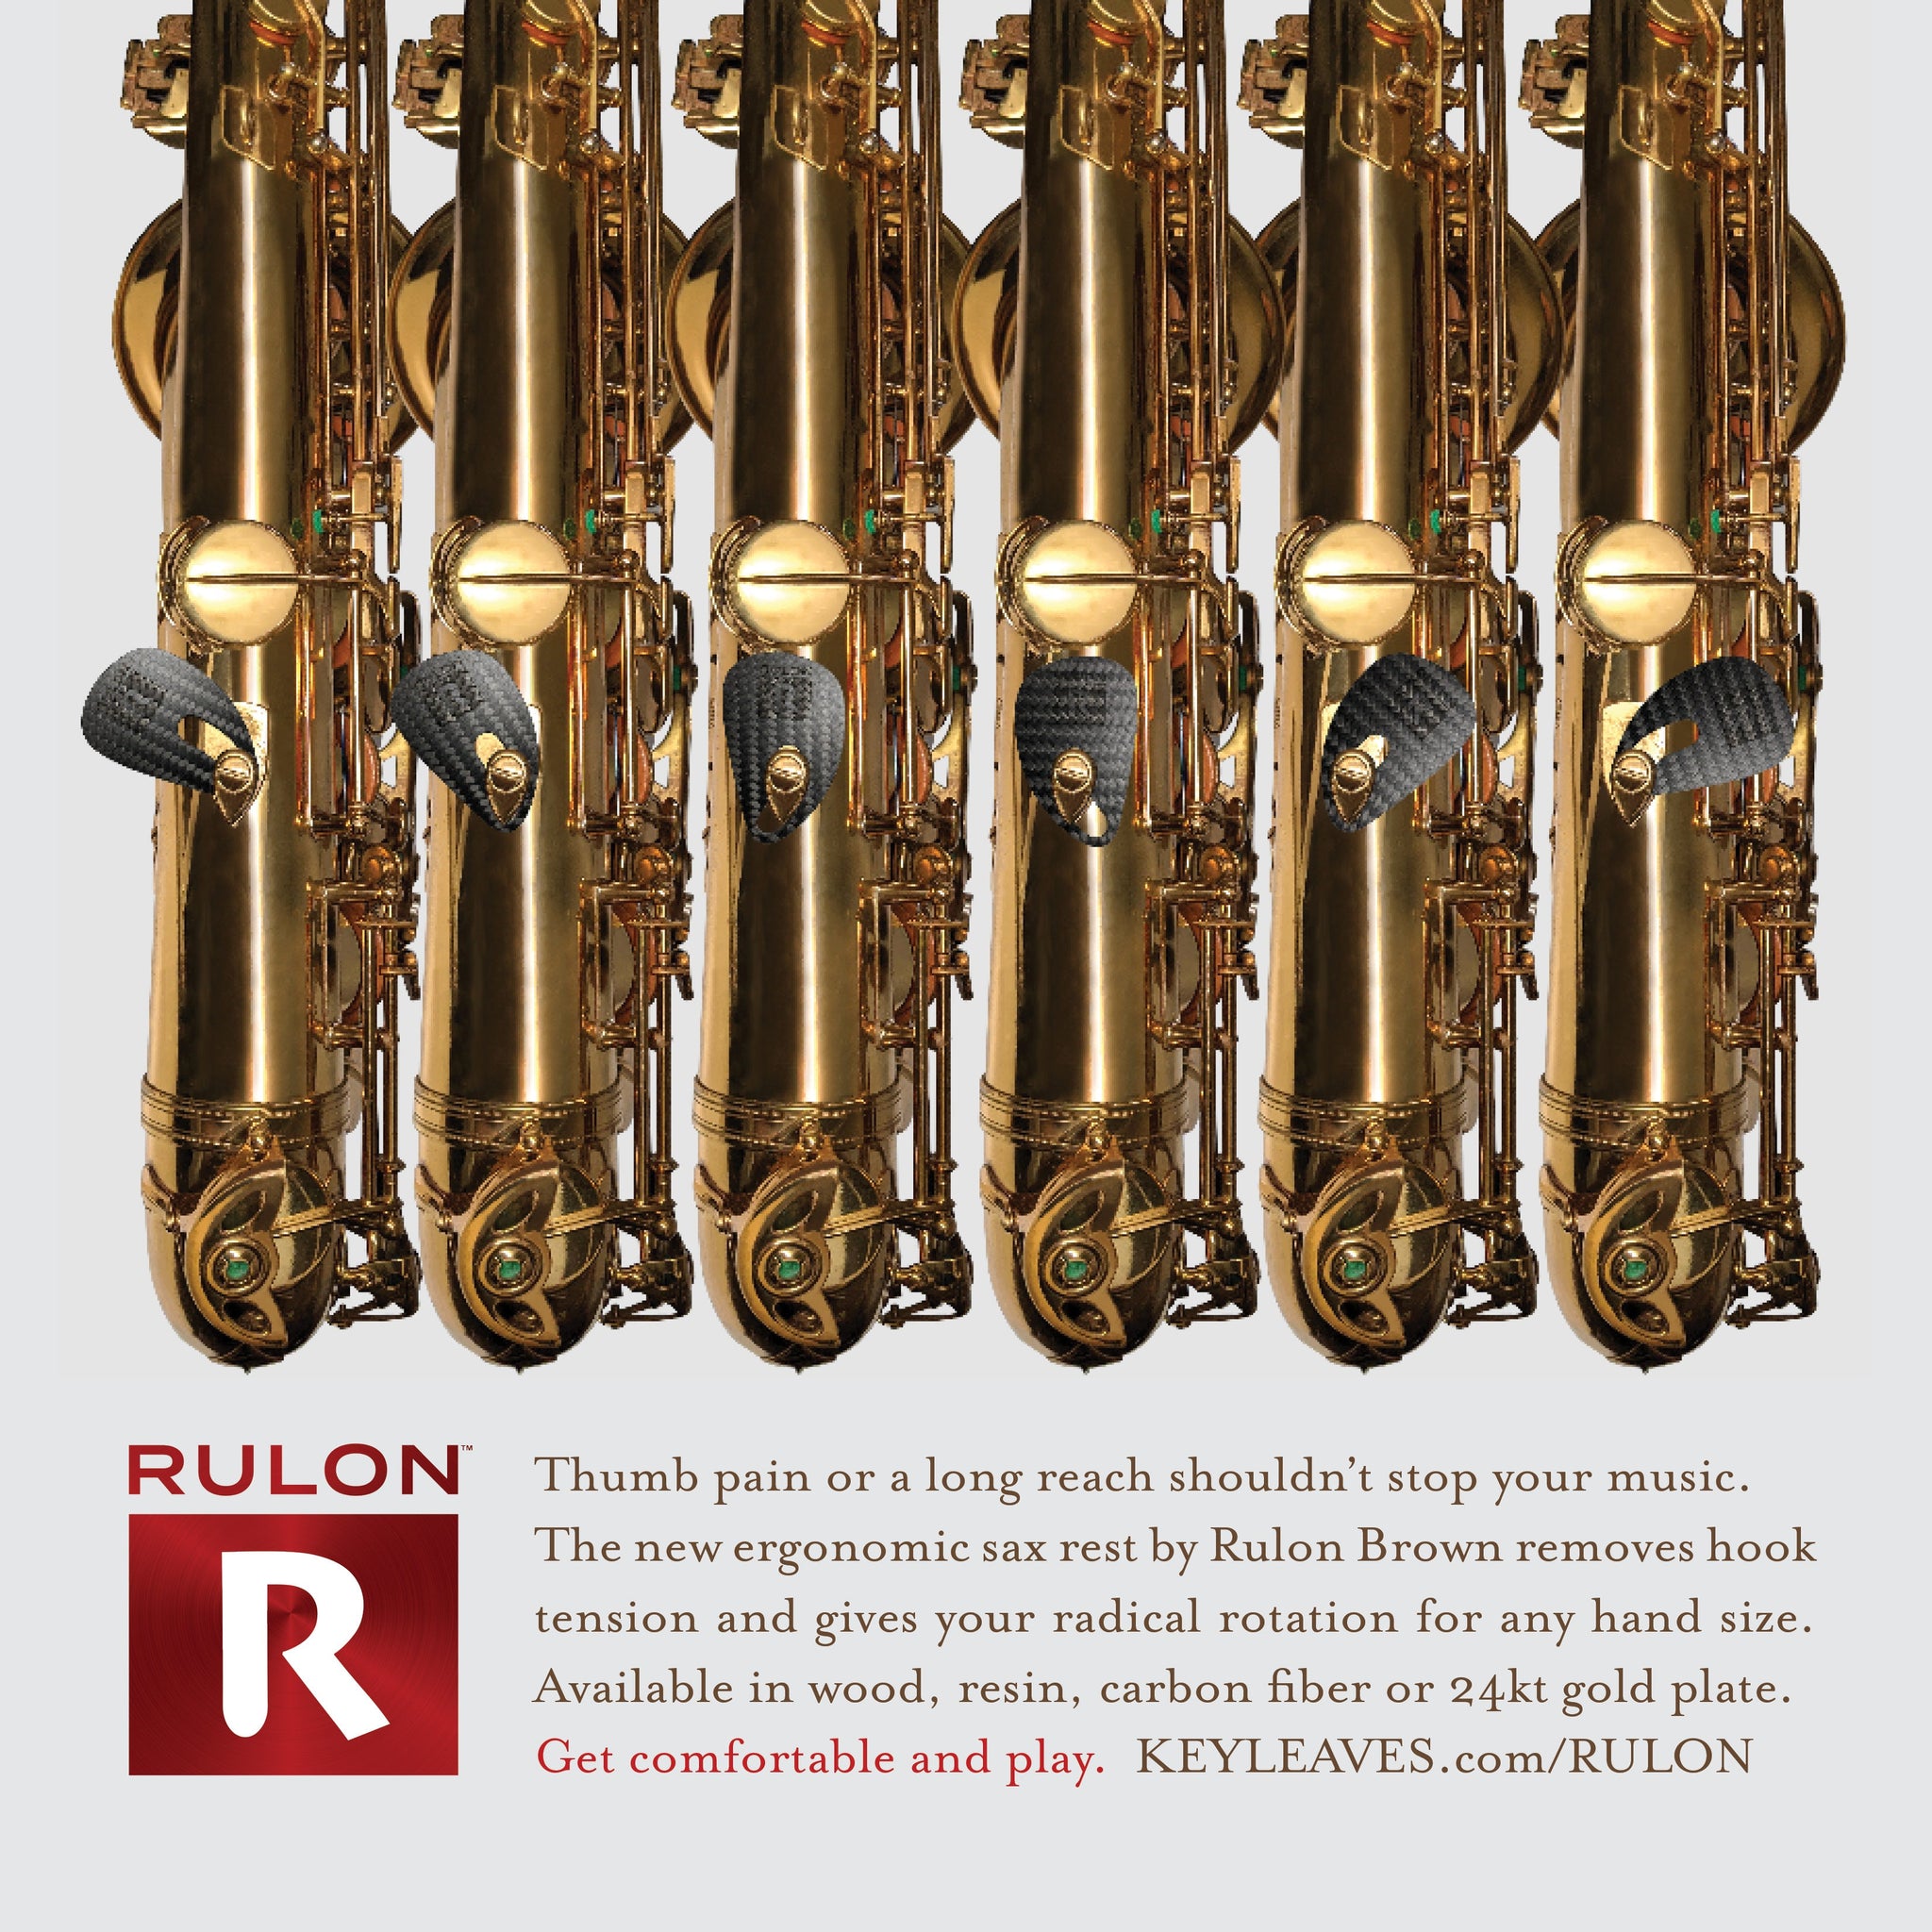 The RULON saxophone thumb rest adjusts up, down, right and left to fit any size hand and make it more comfortable for large thumbs, small hands, and any size player.